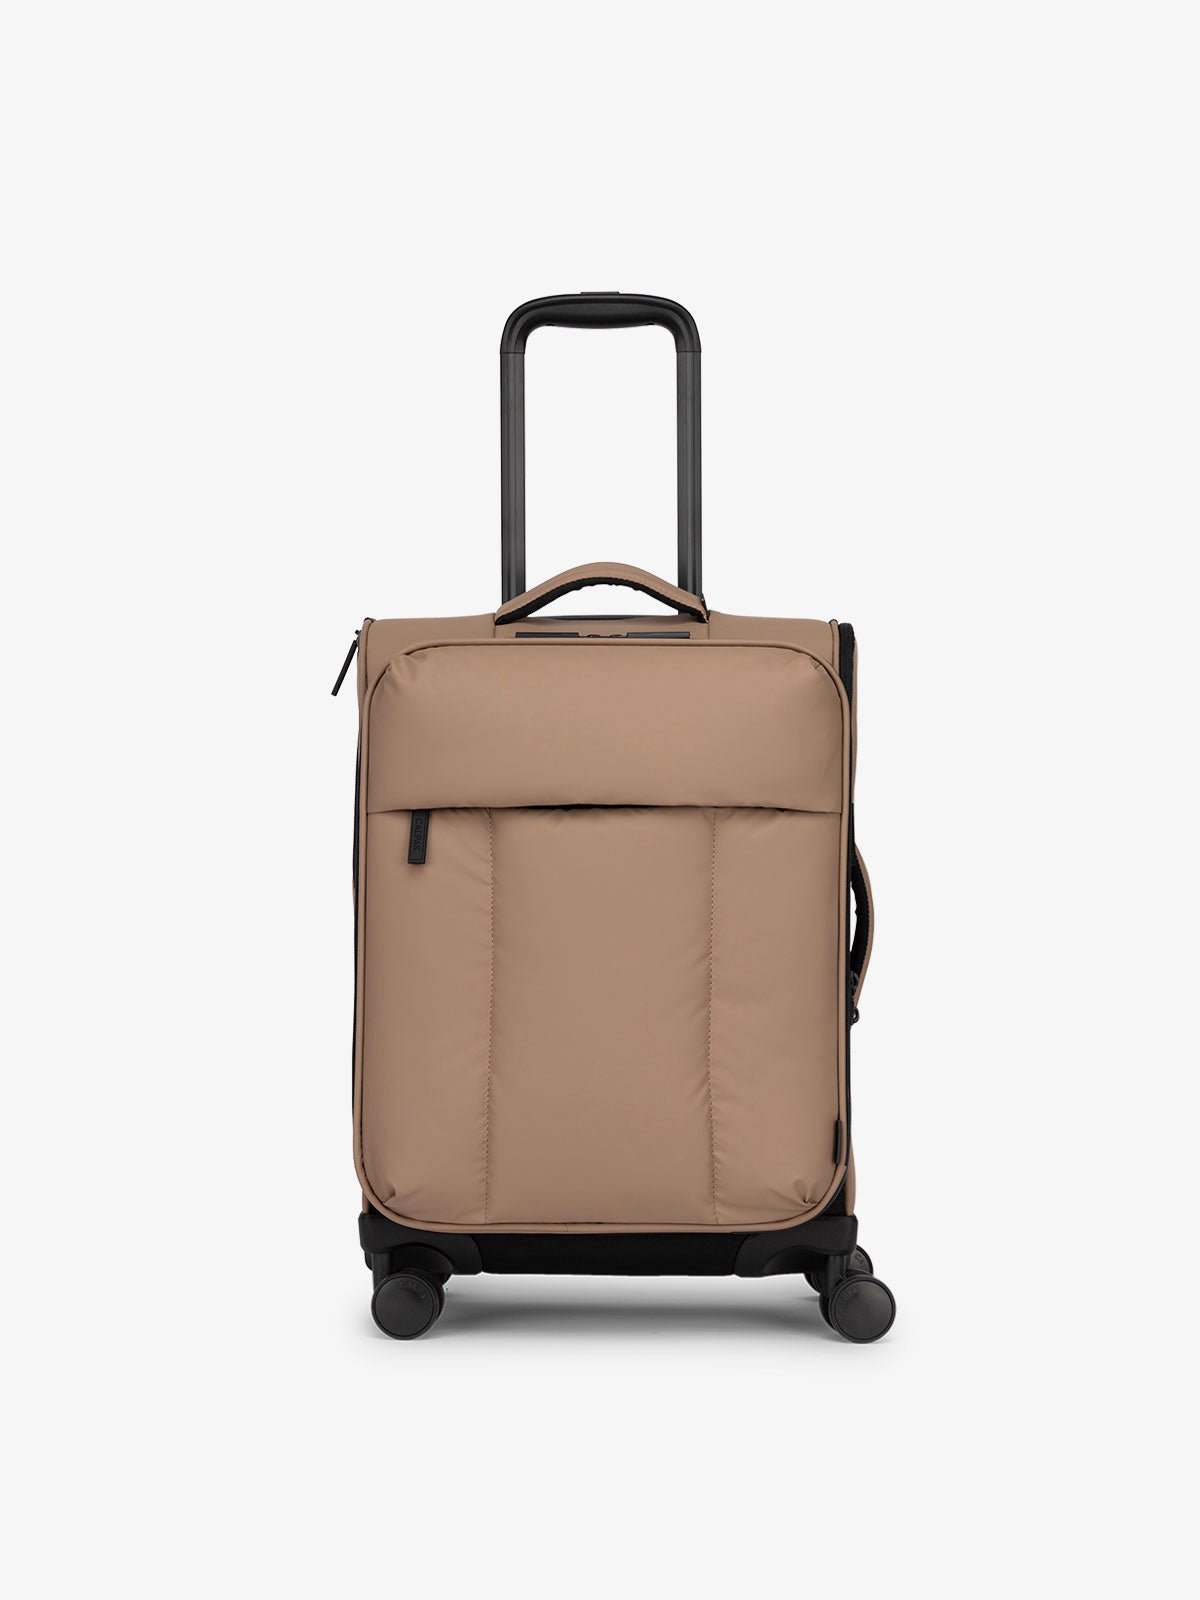 CALPAK Luka soft sided carry on luggage in chocolate